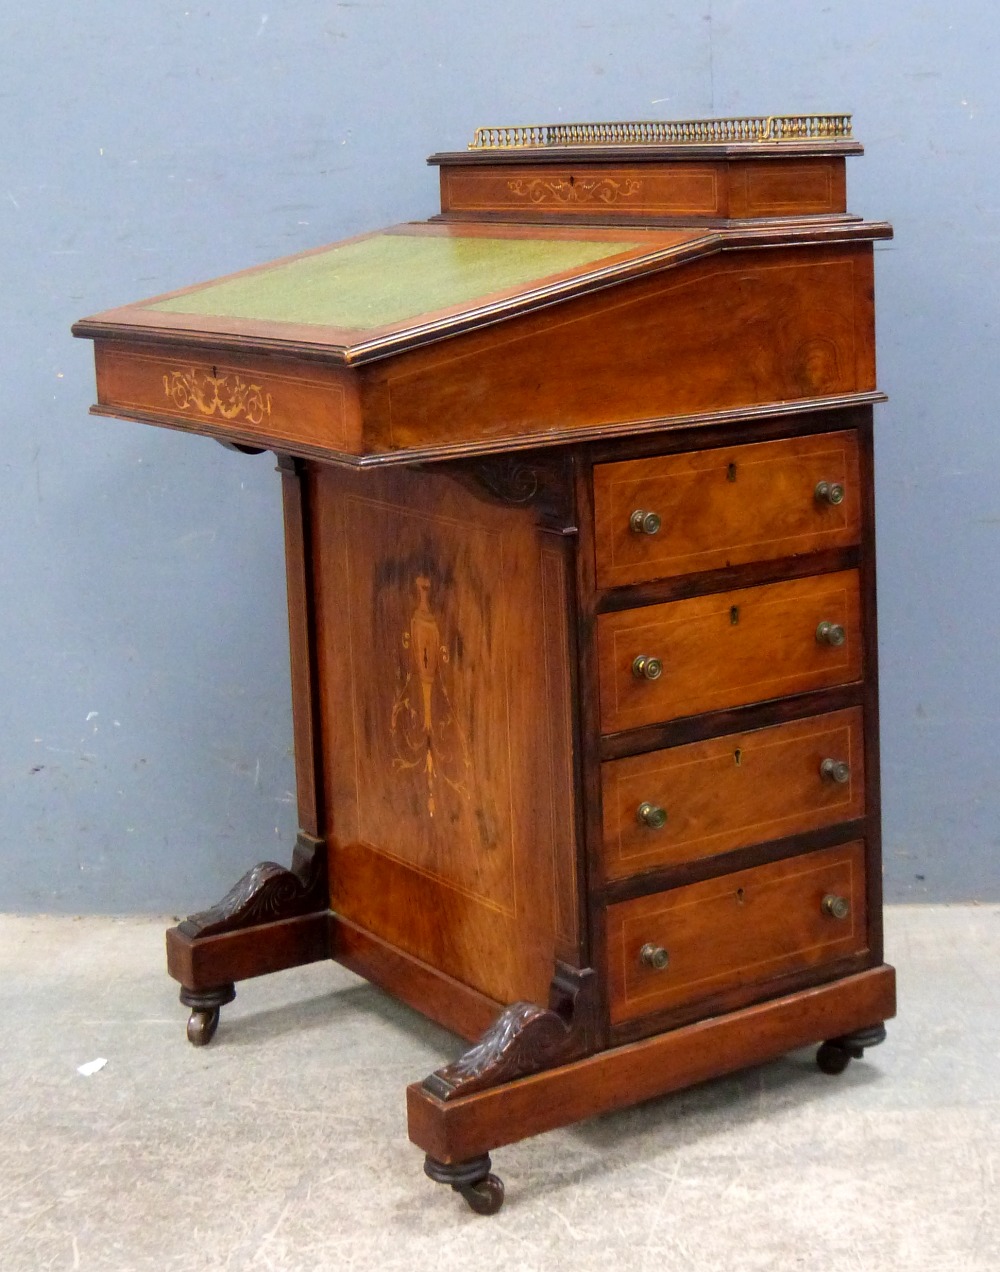 Victorian rosewood Davenport with marquetry inlaid decoration, raised back and four drawers on - Image 3 of 3